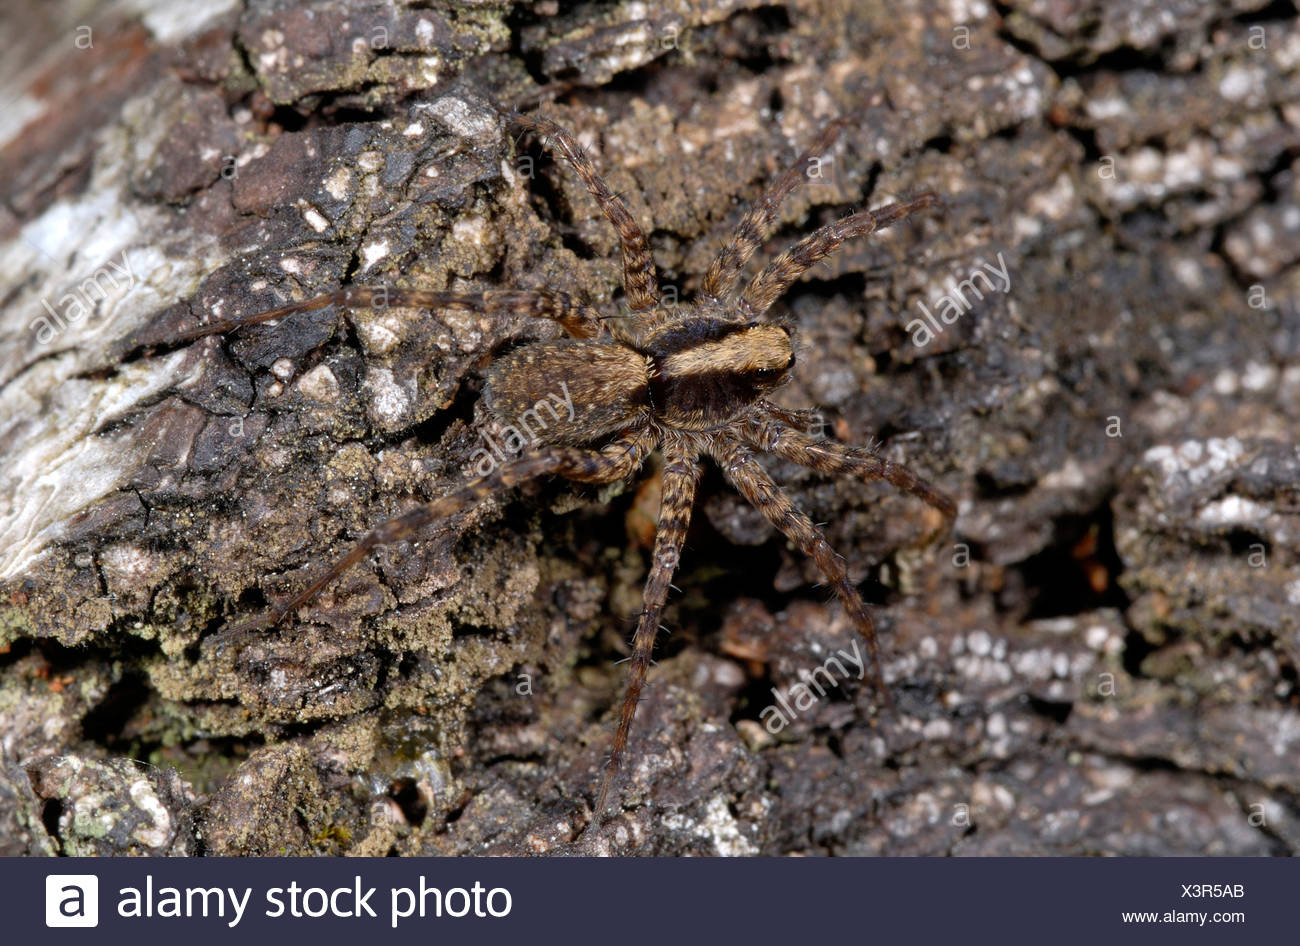 Wolf Spider Pardosa Lugubris Close Up Of Female Spider Camouflaged On A Pine Tree In A Norfolk Wood Stock Photo Alamy